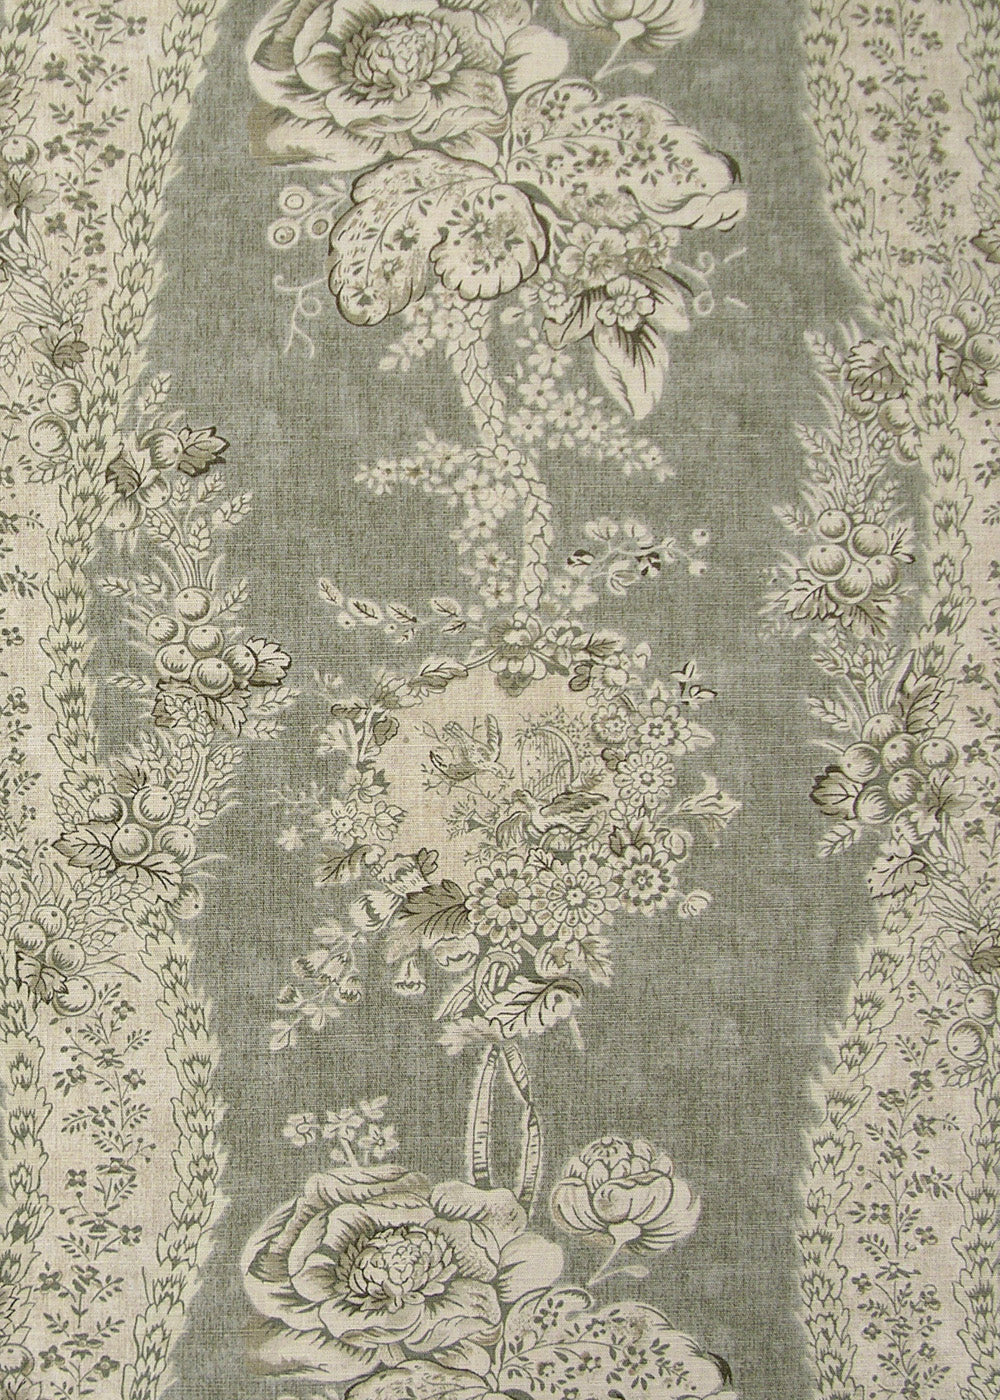 gray fabric with a monochromatic pattern of florals, vines, and berries